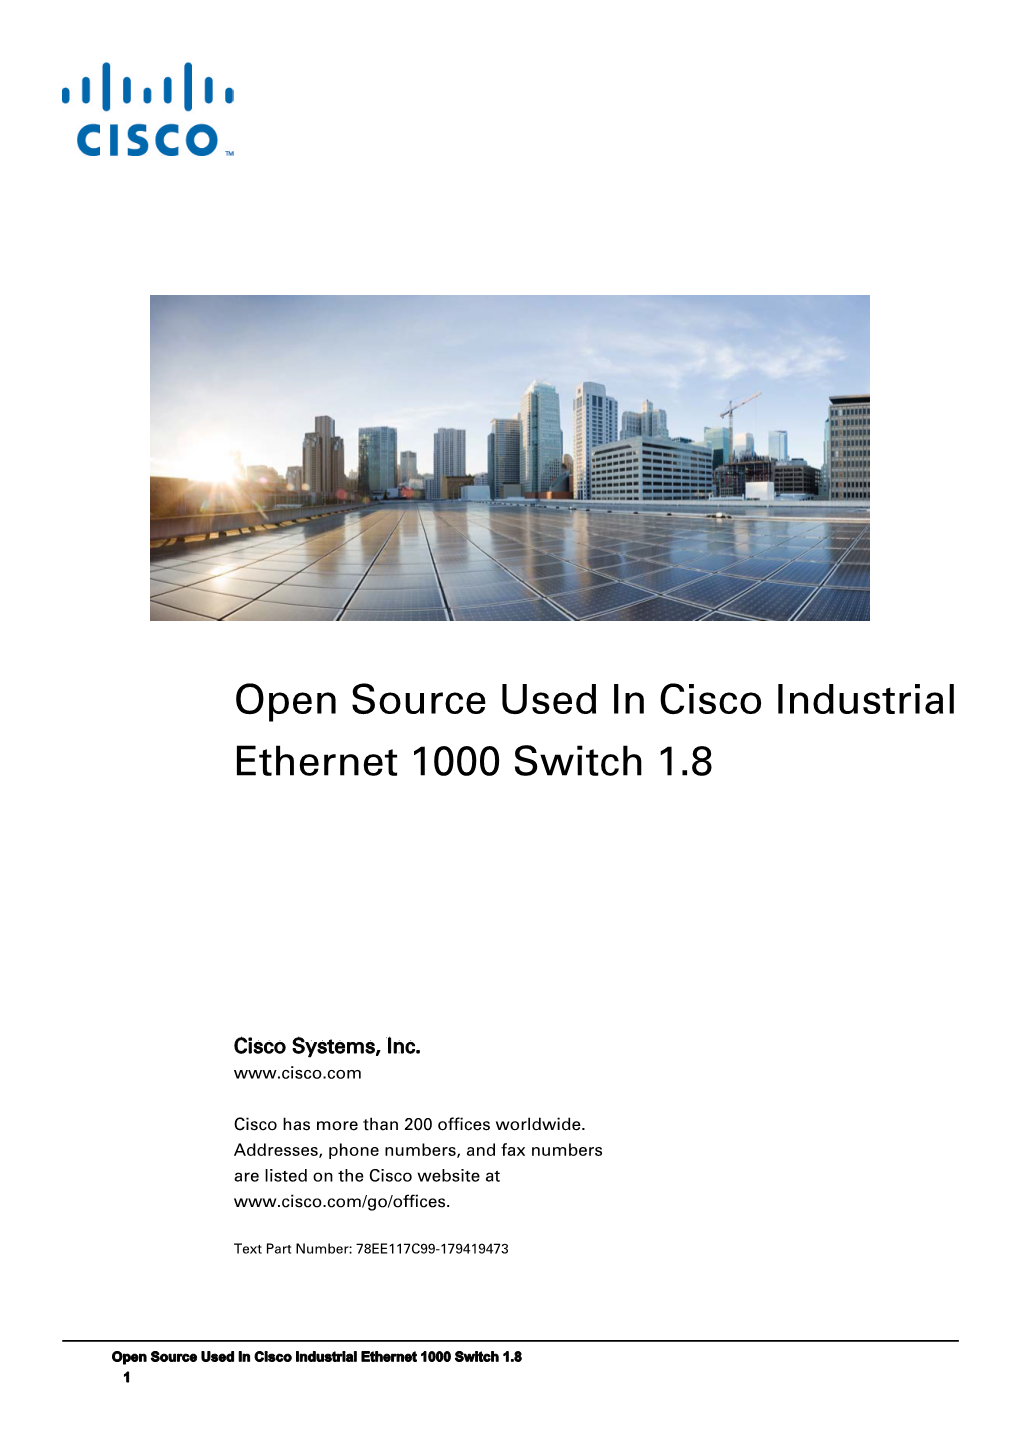 Open Source Used in Cisco Industrial Ethernet 1000 Switch 1.8